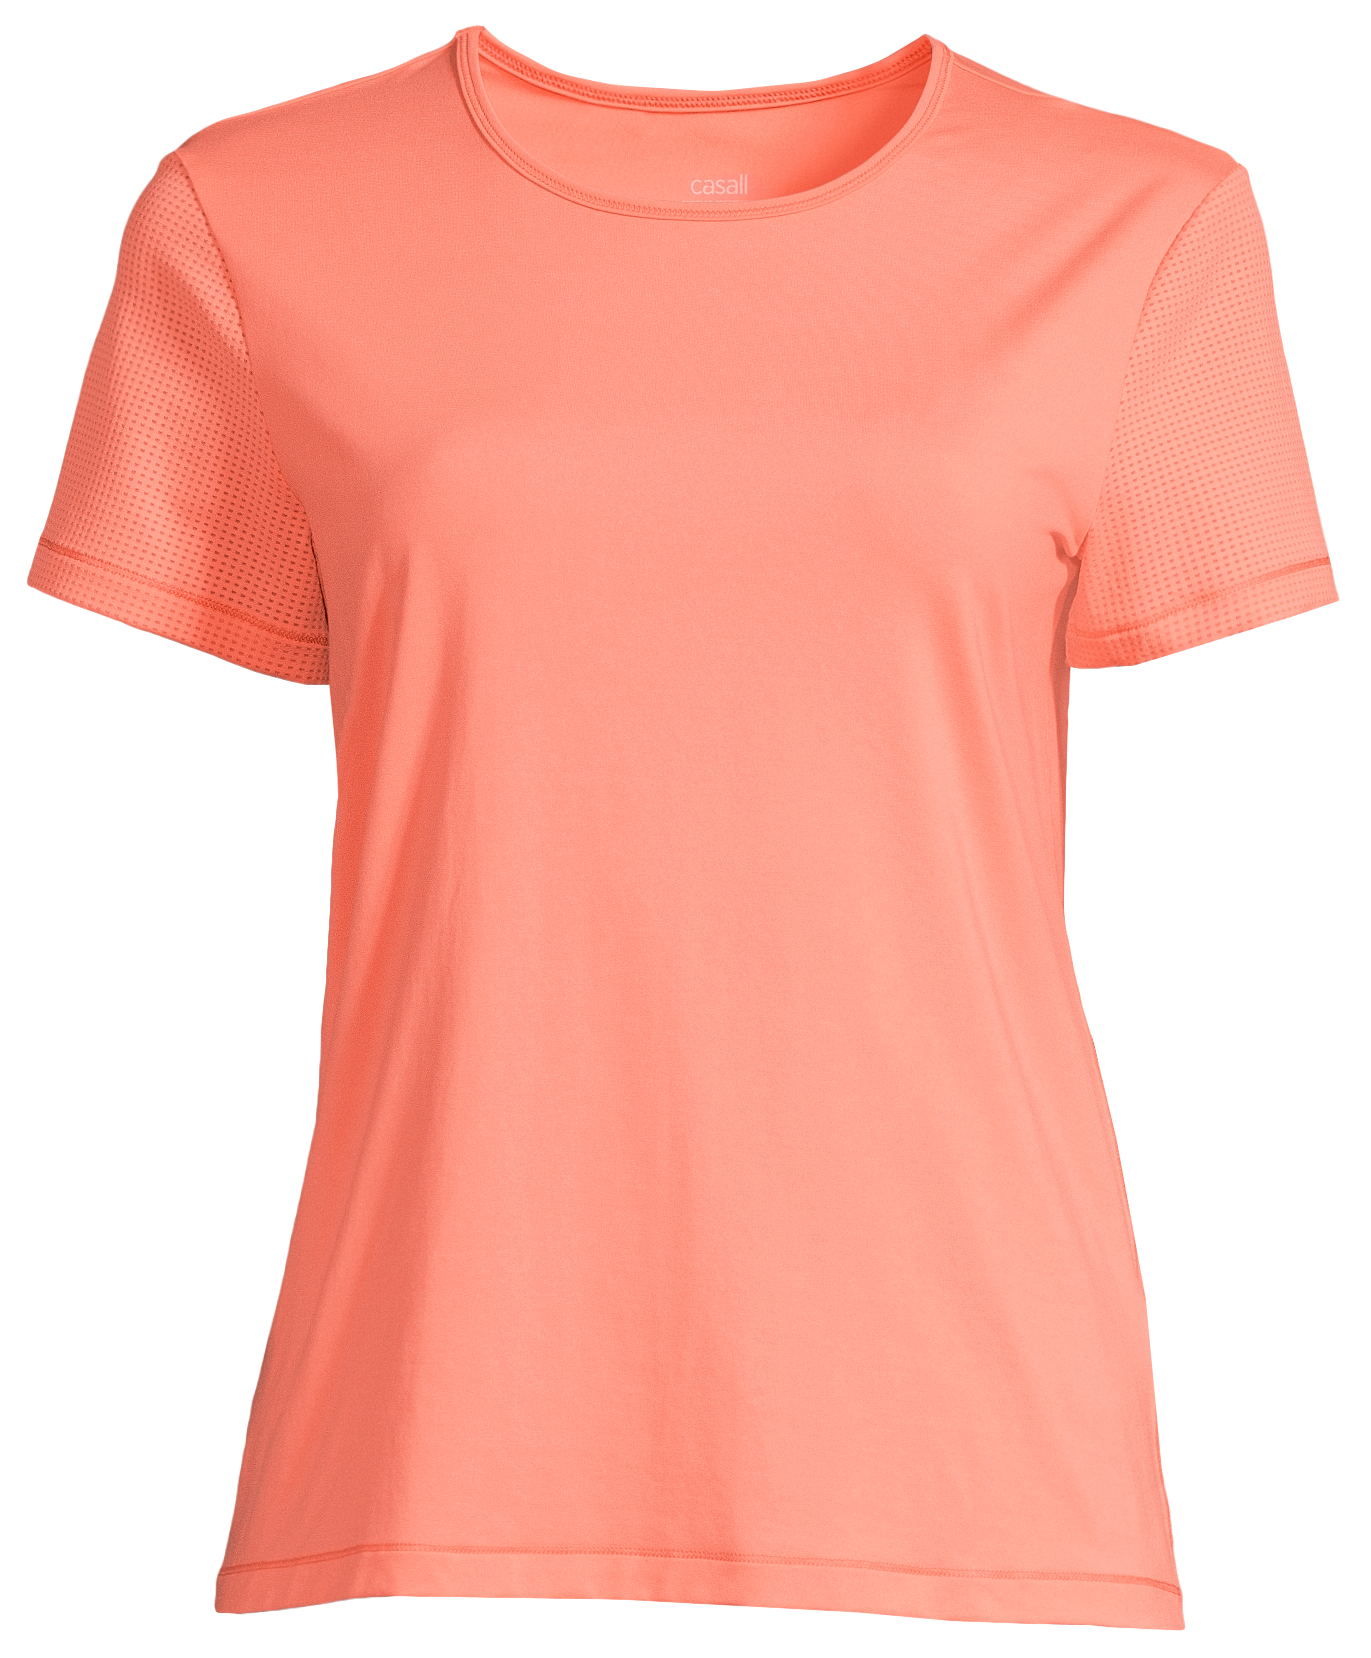 CASALL Women’s Iconic Tee Pale Coral